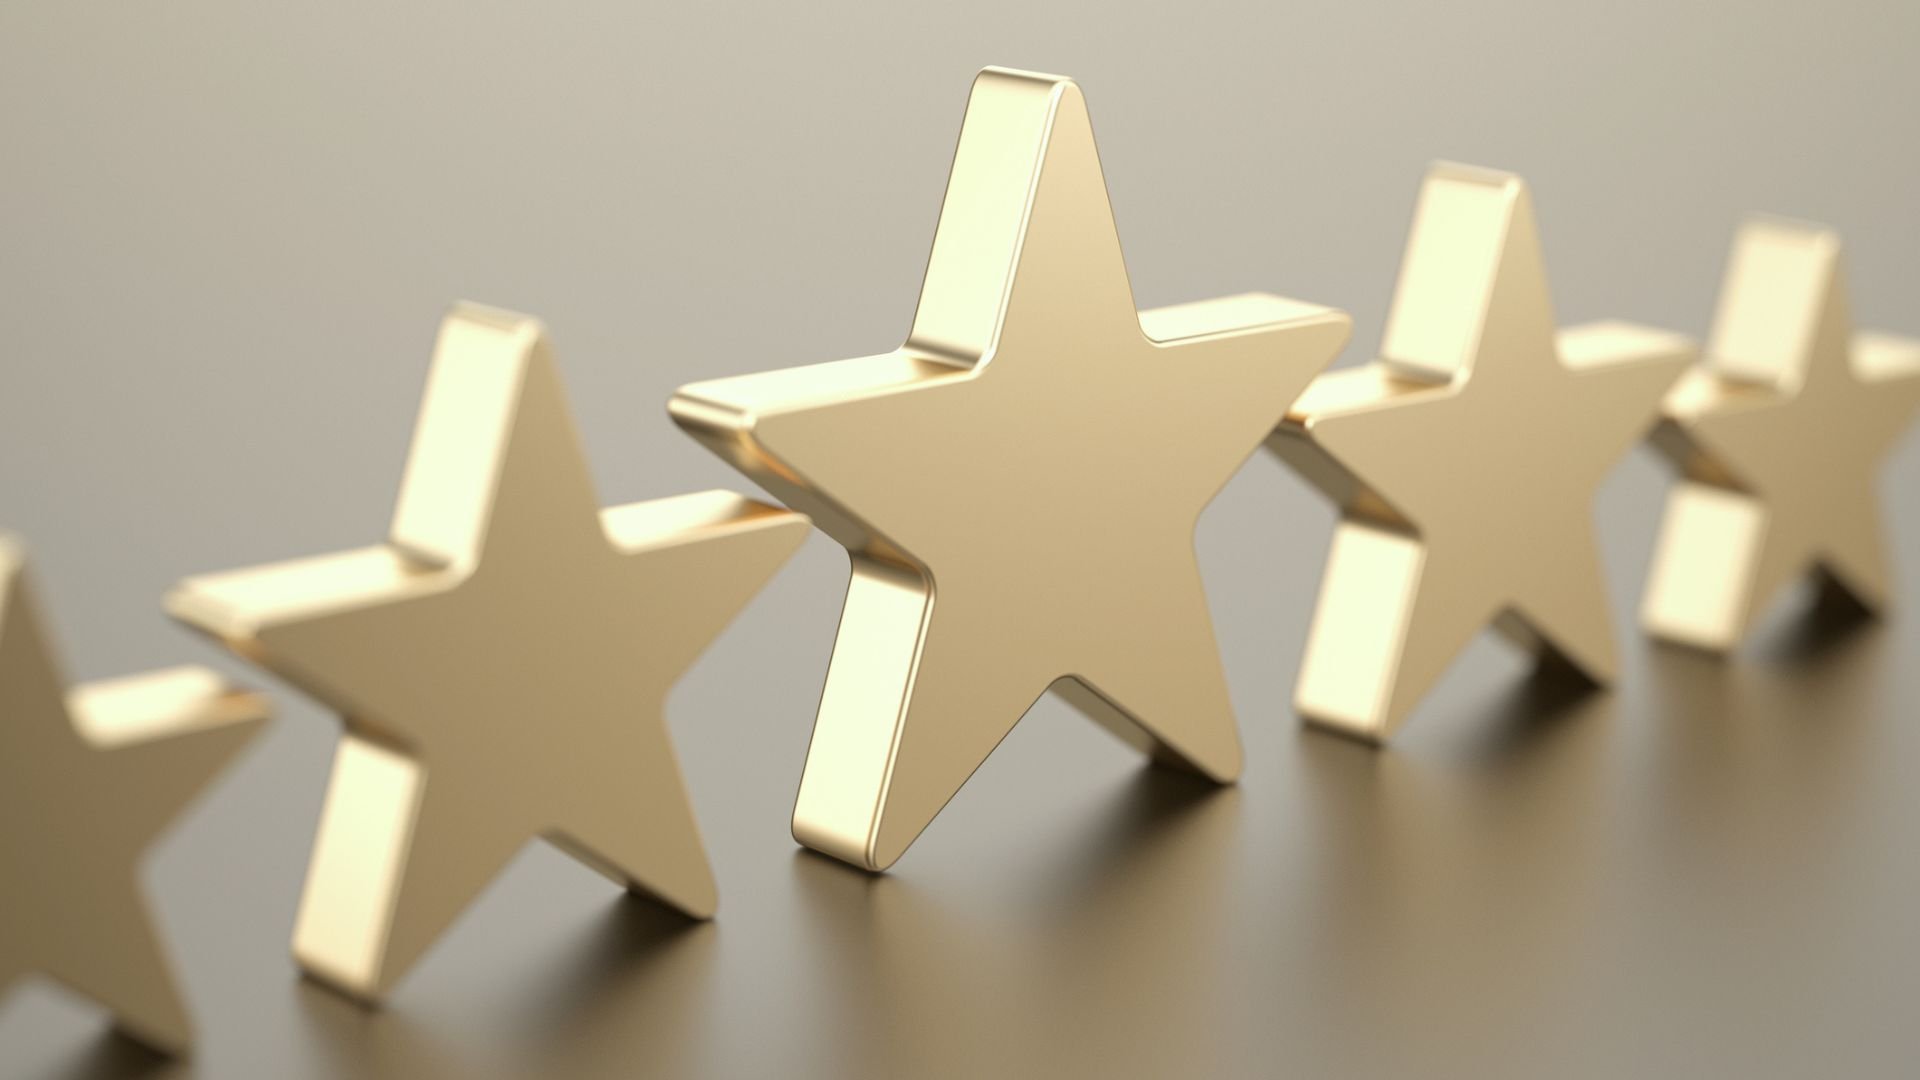 JPM24, Day 3: Alignment Healthcare praises star rating changes